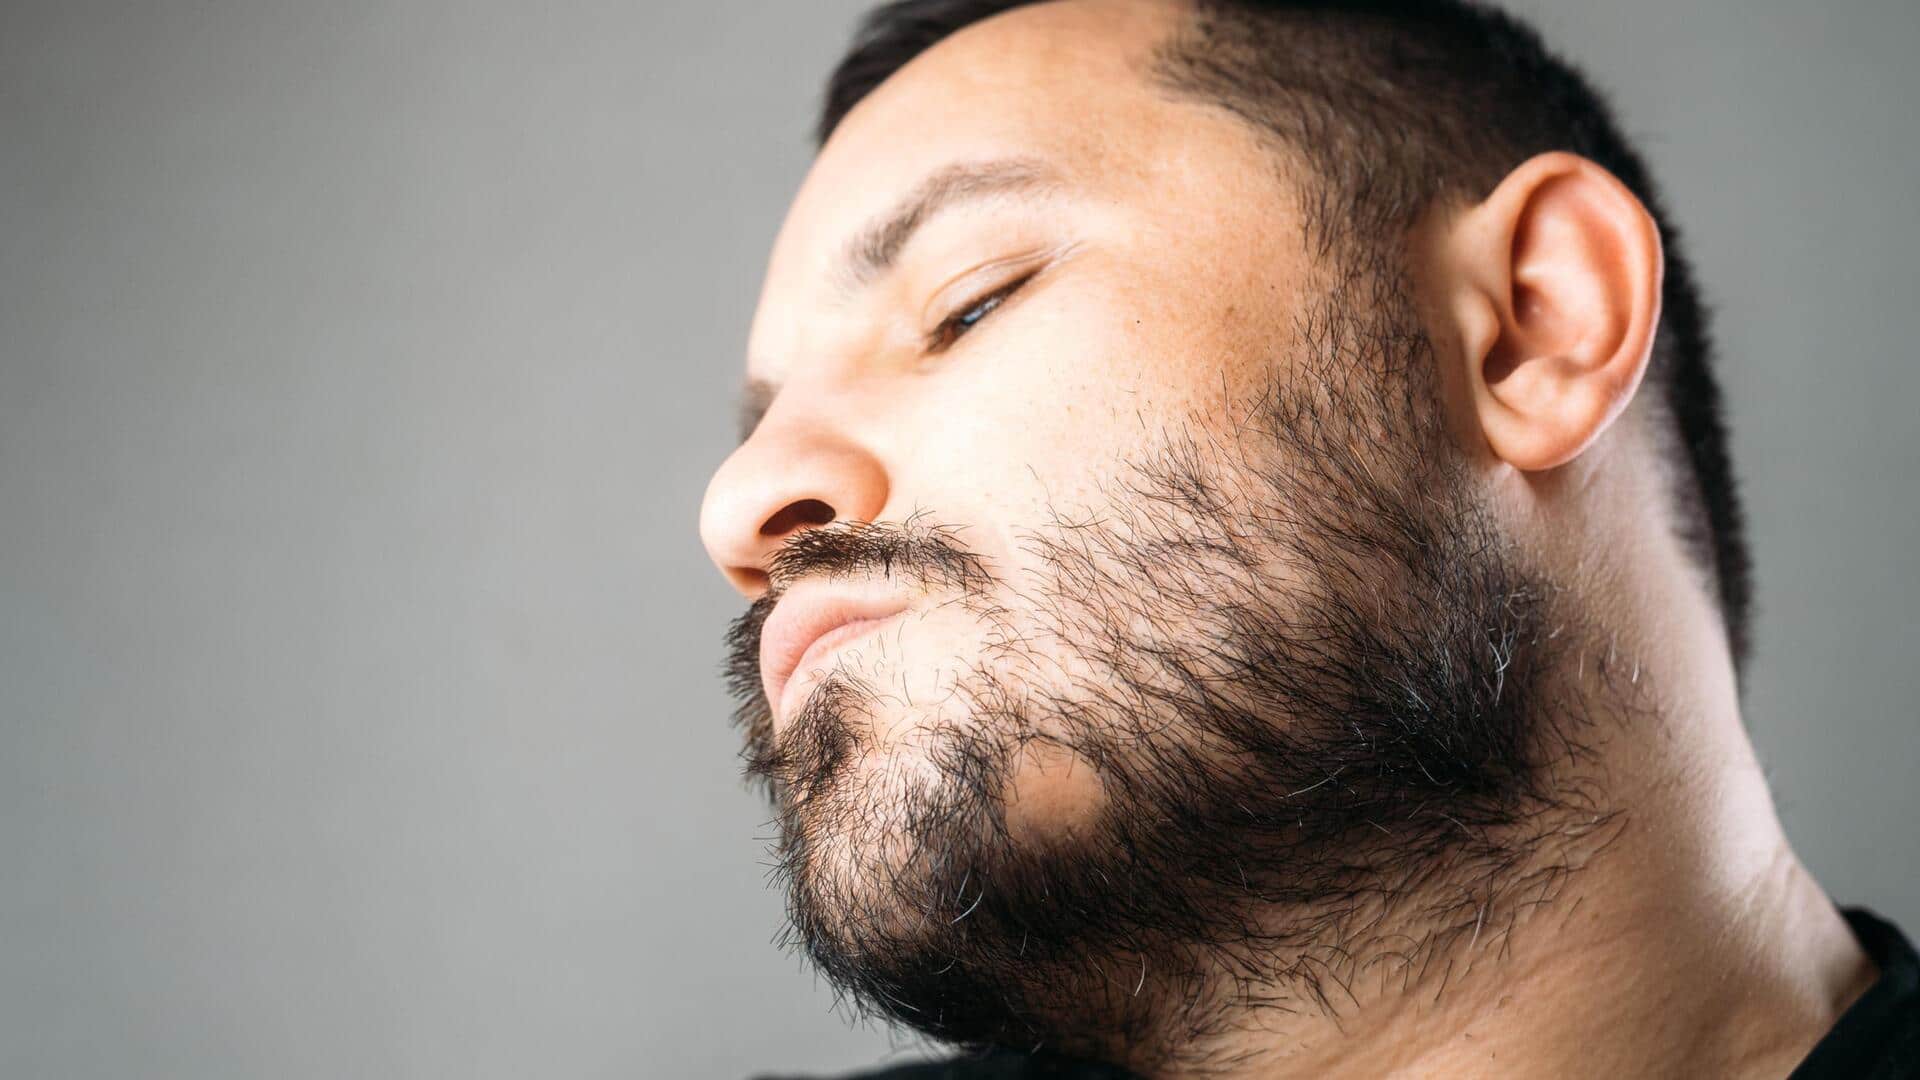 Bald patches in beard? These home remedies can work effectively